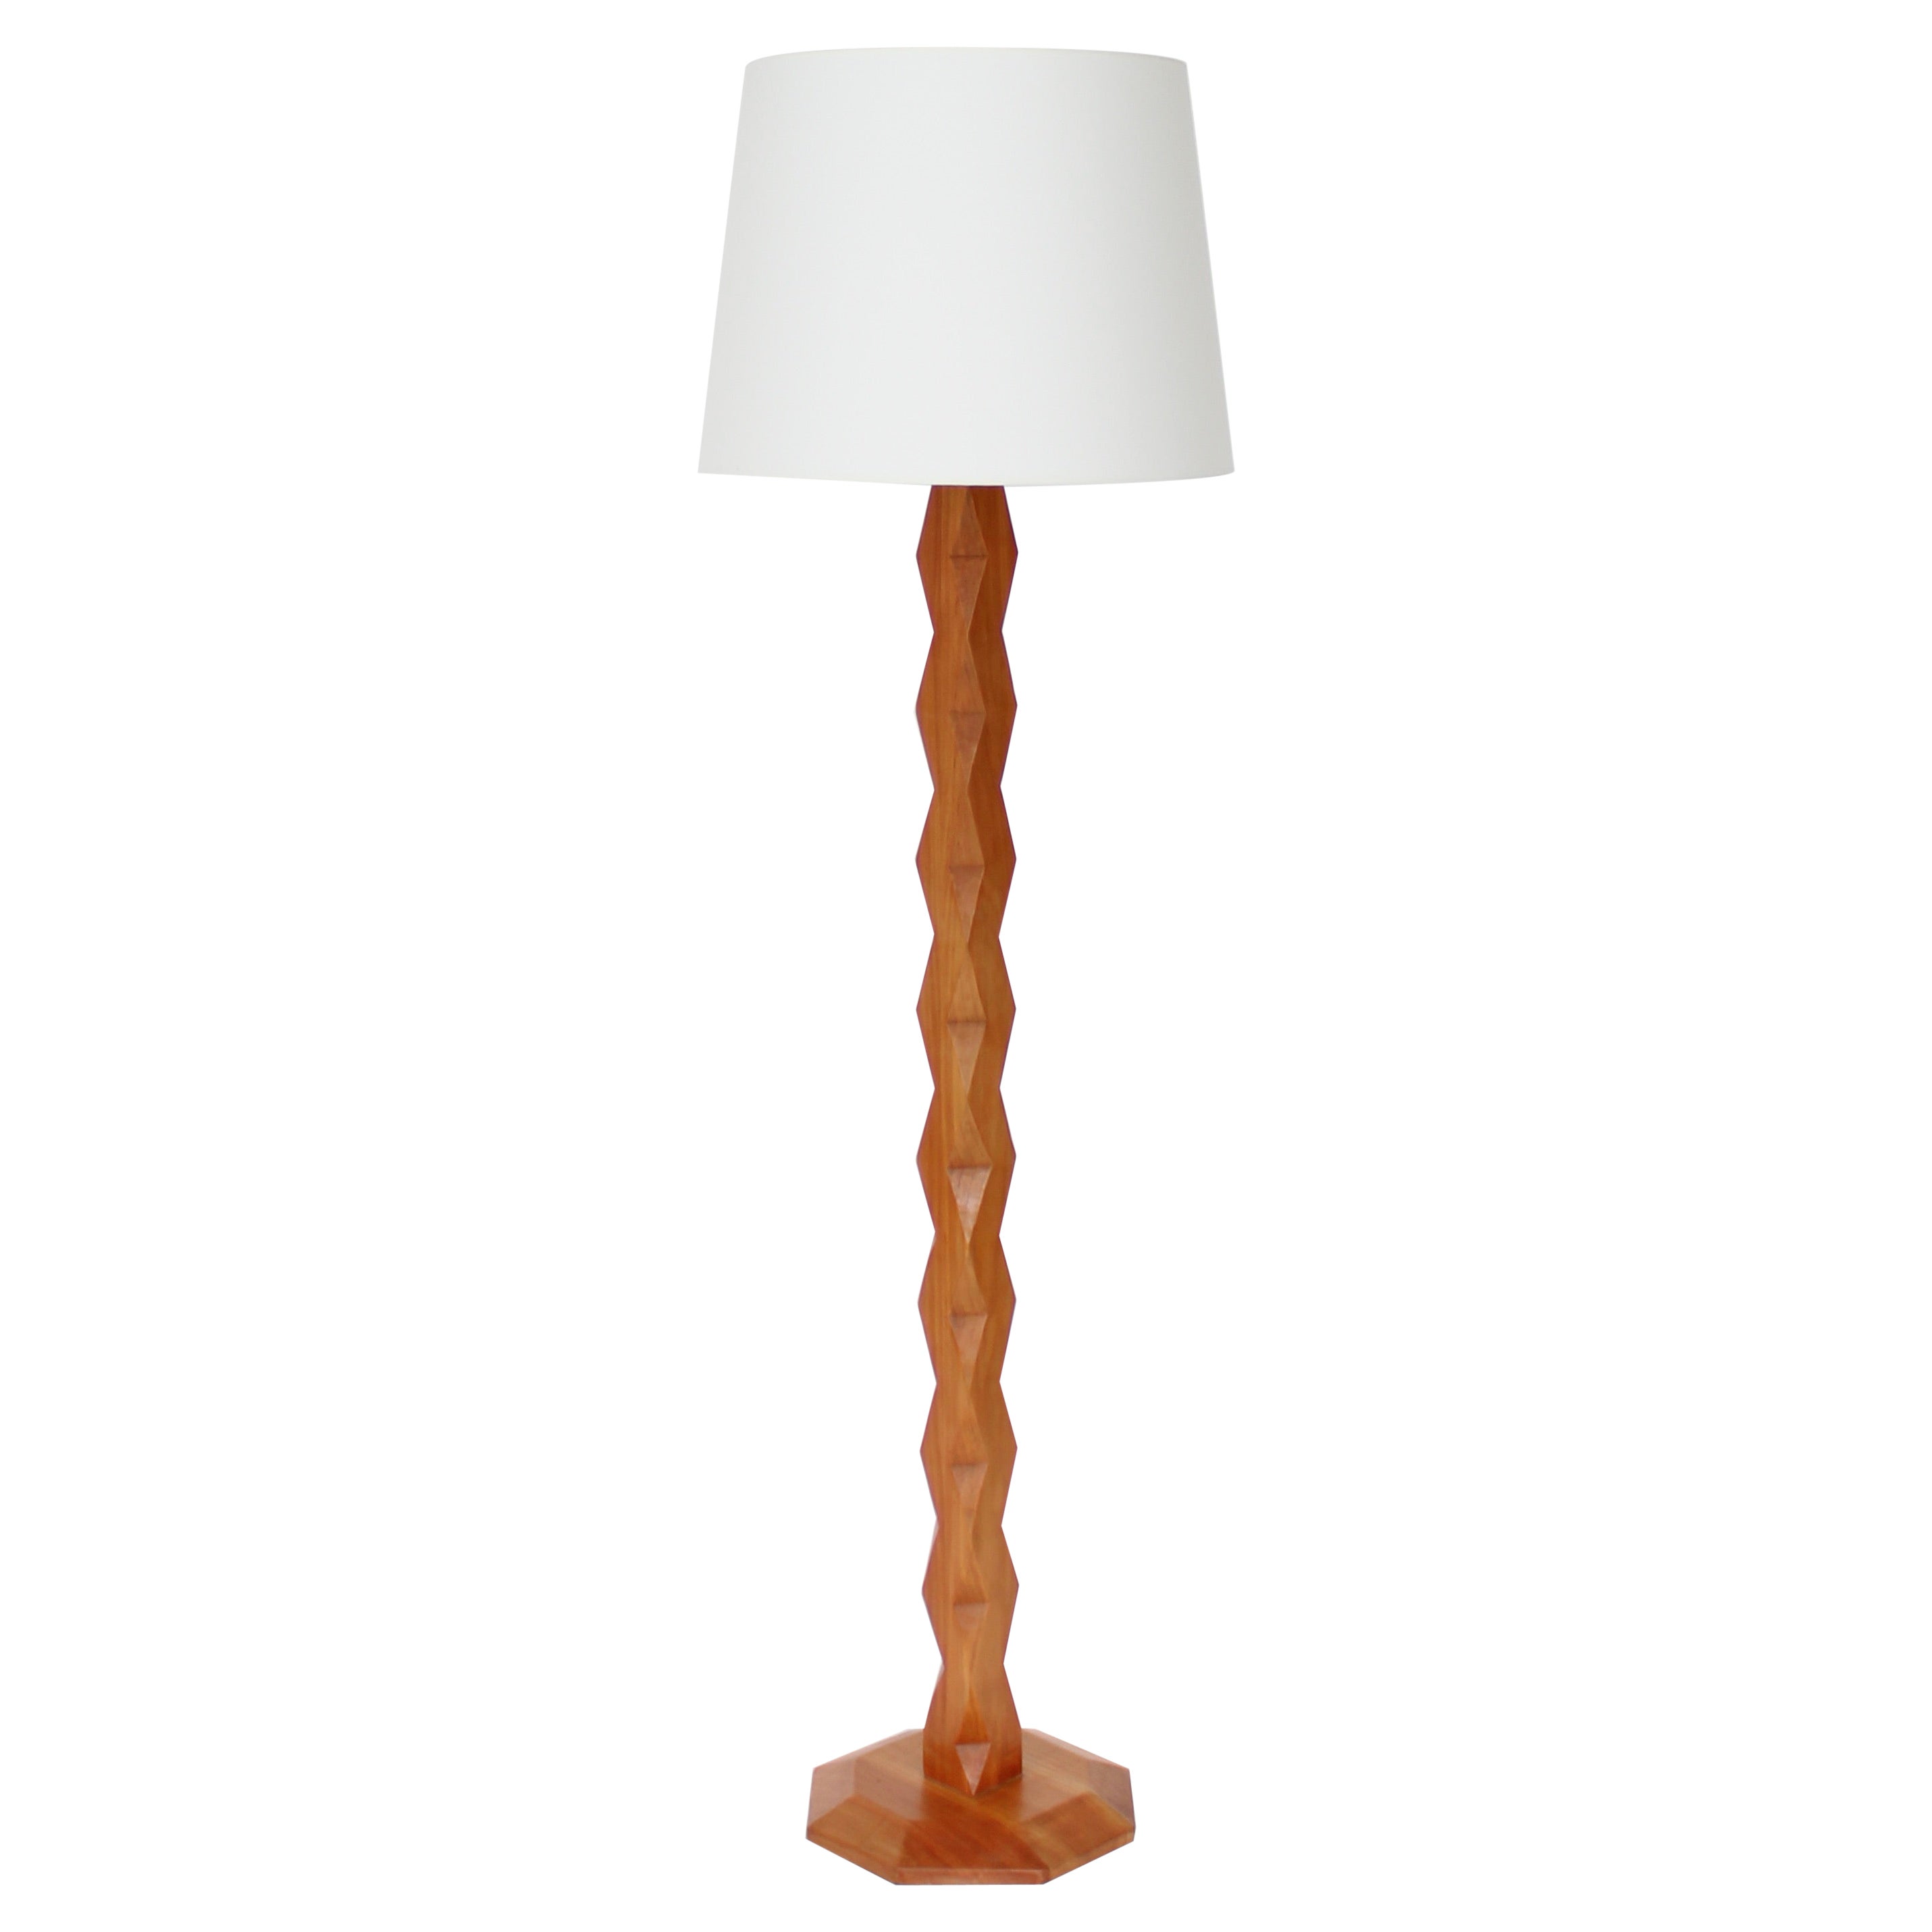 French Carved Faceted Sculptural Elm Wood Floor Lamp Inspired by Brancusi 